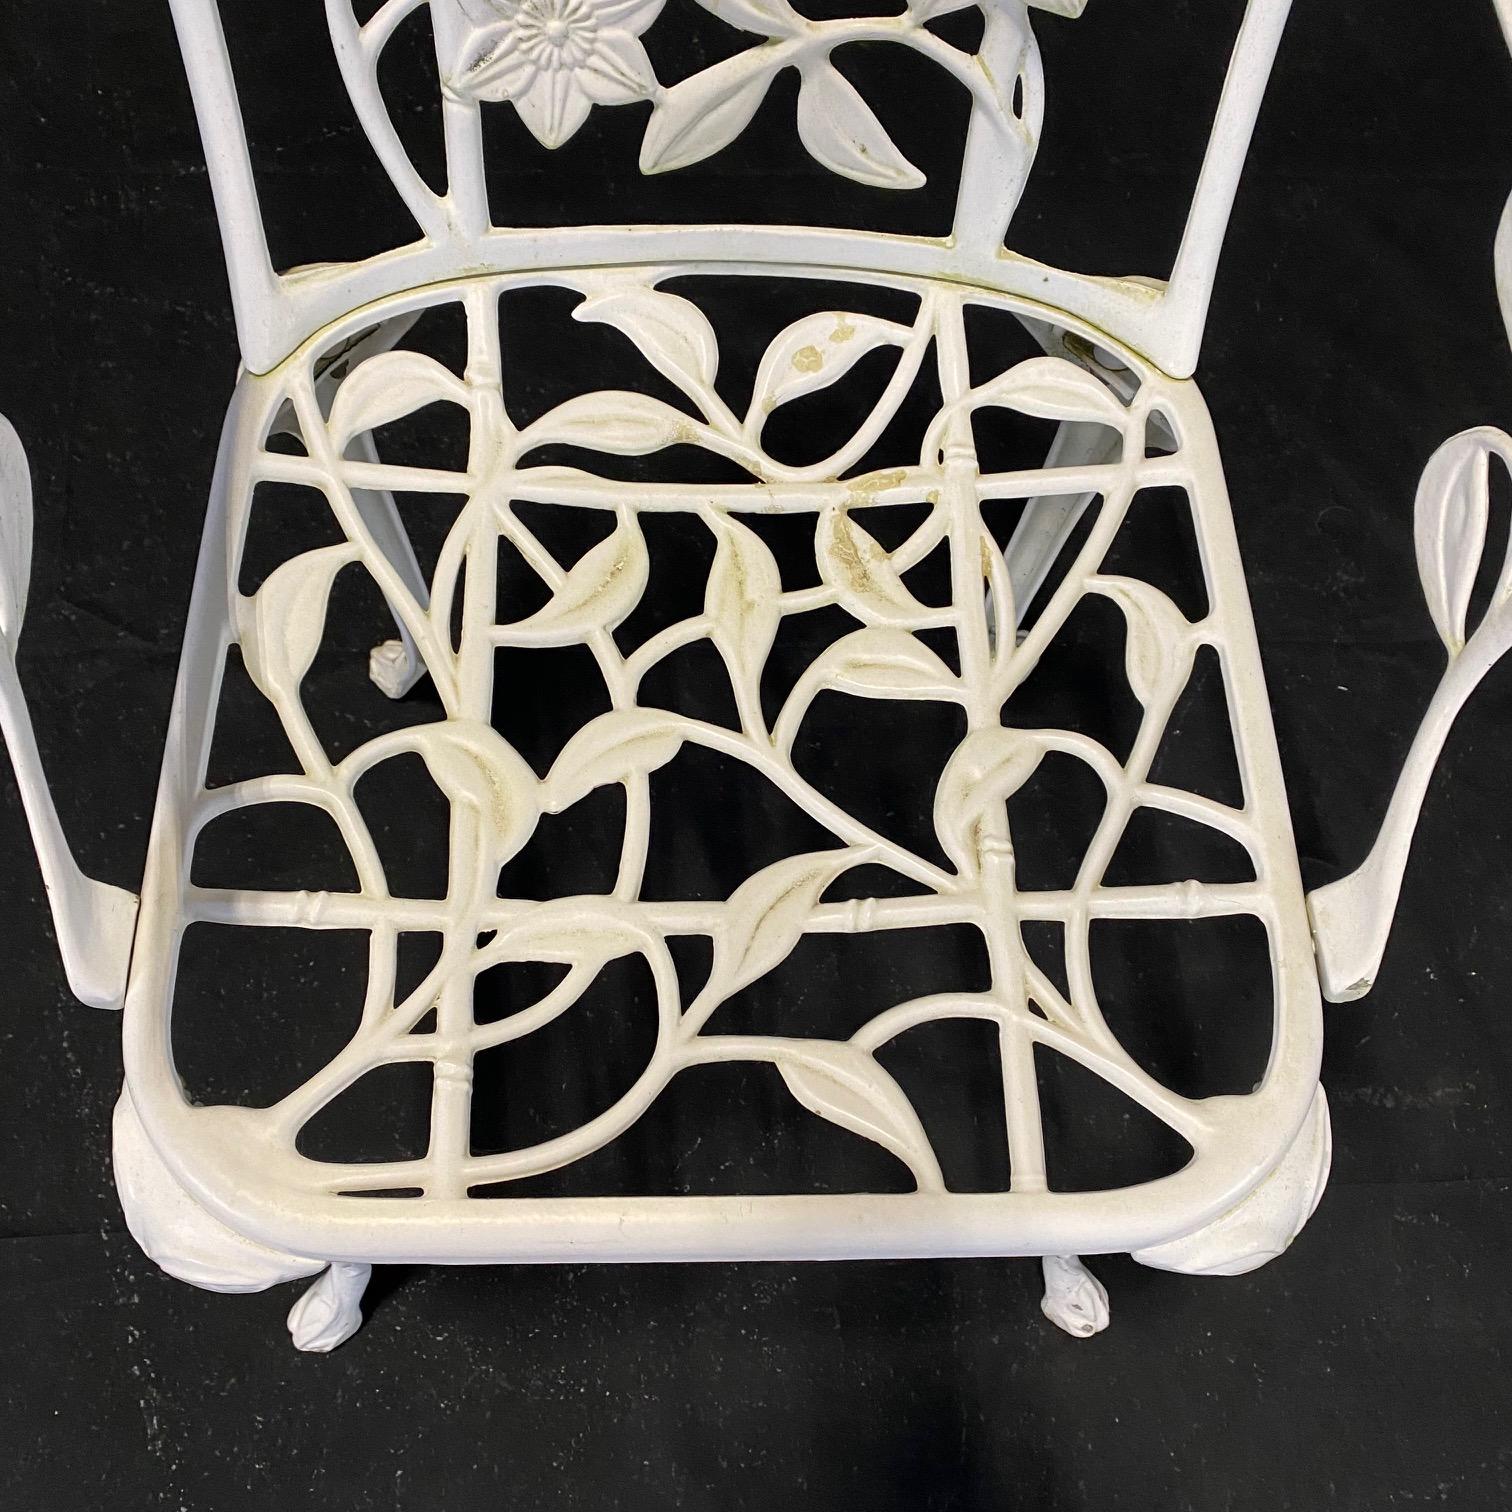 Vintage 5 Piece Set of English Nova Garden Patio Furniture with Vines and Leaves For Sale 5